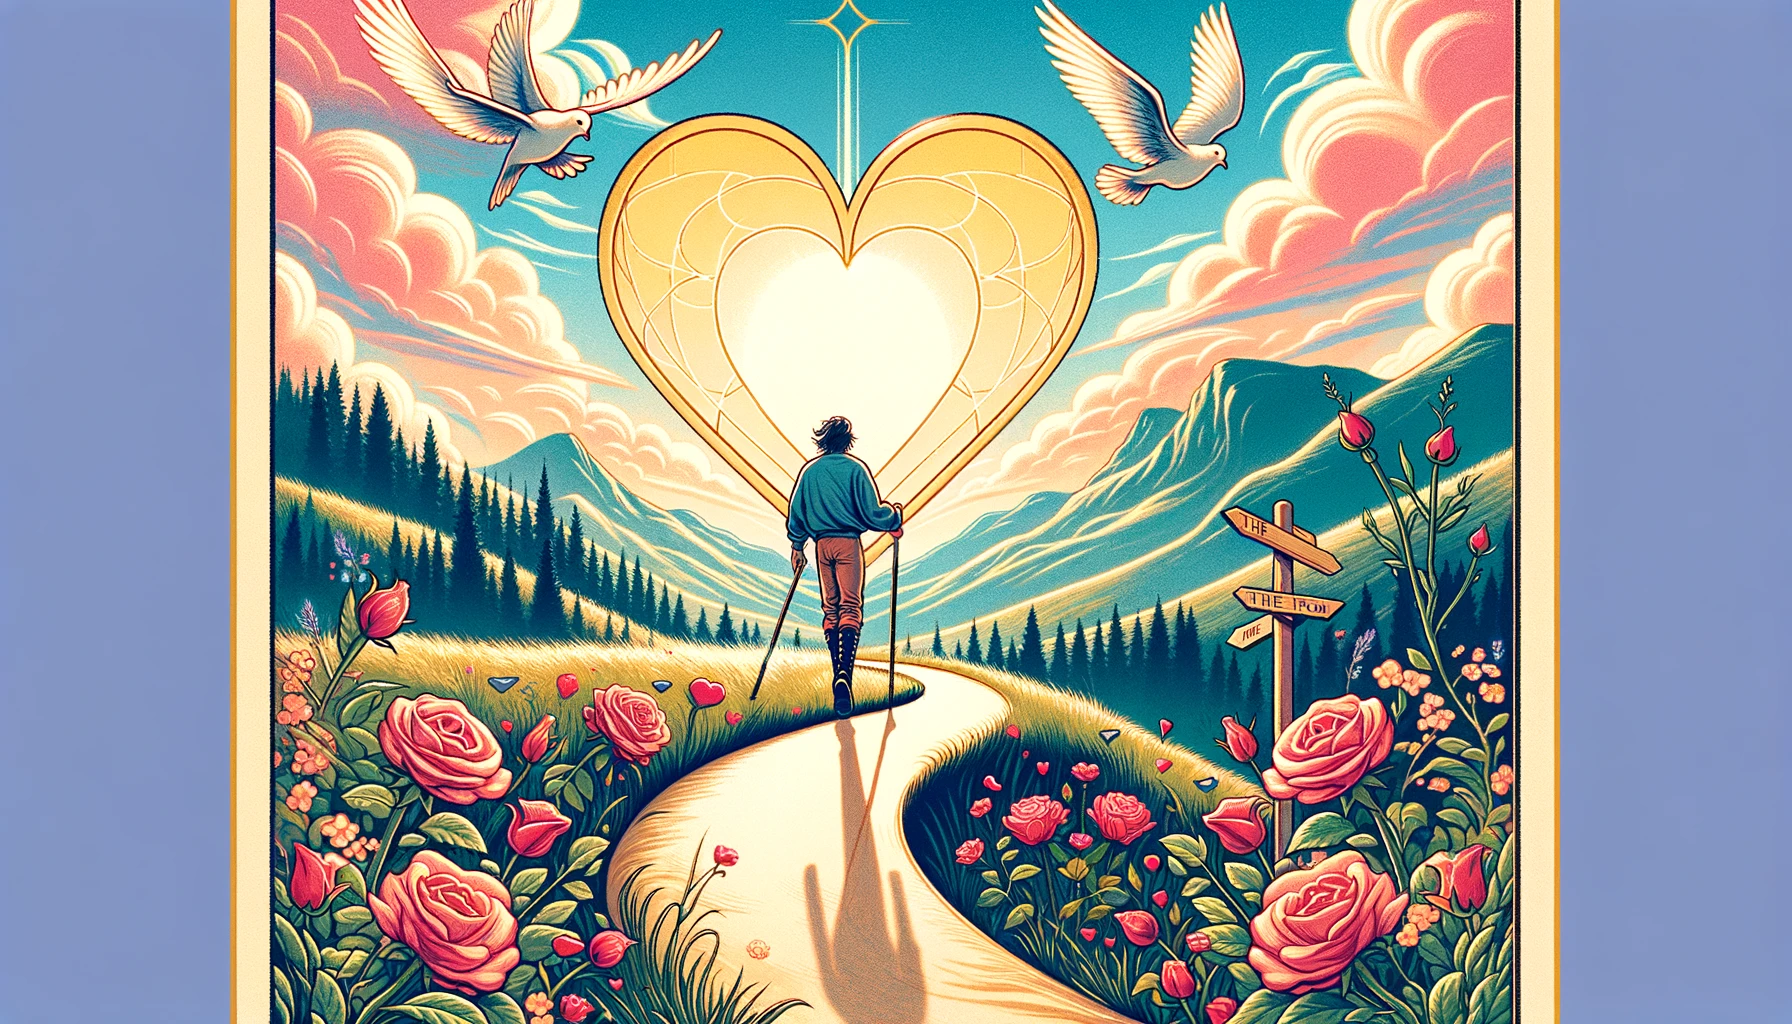 "Illustration featuring a person joyfully stepping forward with arms outstretched, symbolizing the freedom and spontaneity of new beginnings in love, against a backdrop of sunny skies and open landscape, evoking the sense of embarking on a joyful new journey."